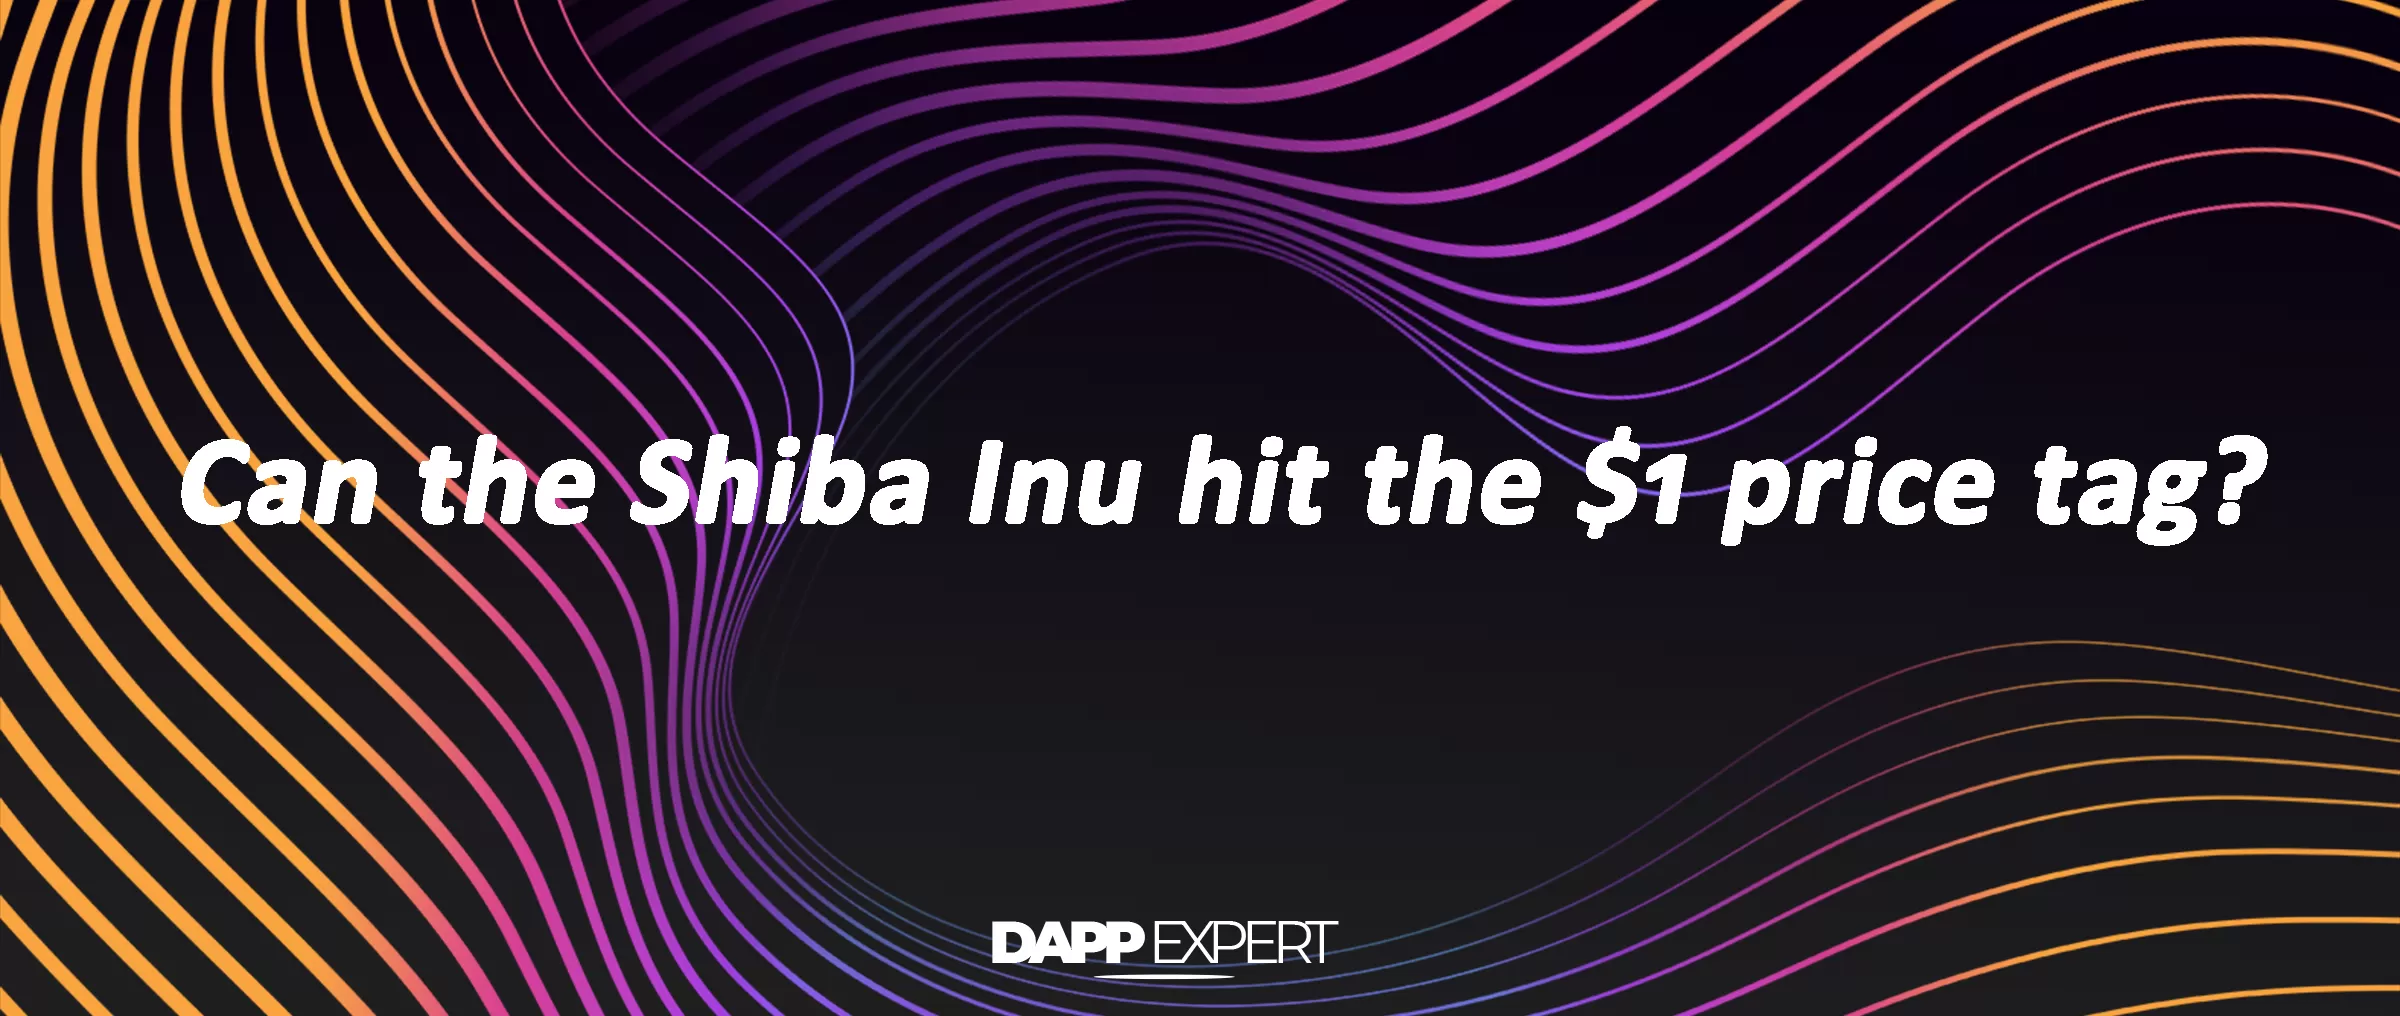 Can the Shiba Inu hit the $1 price tag?